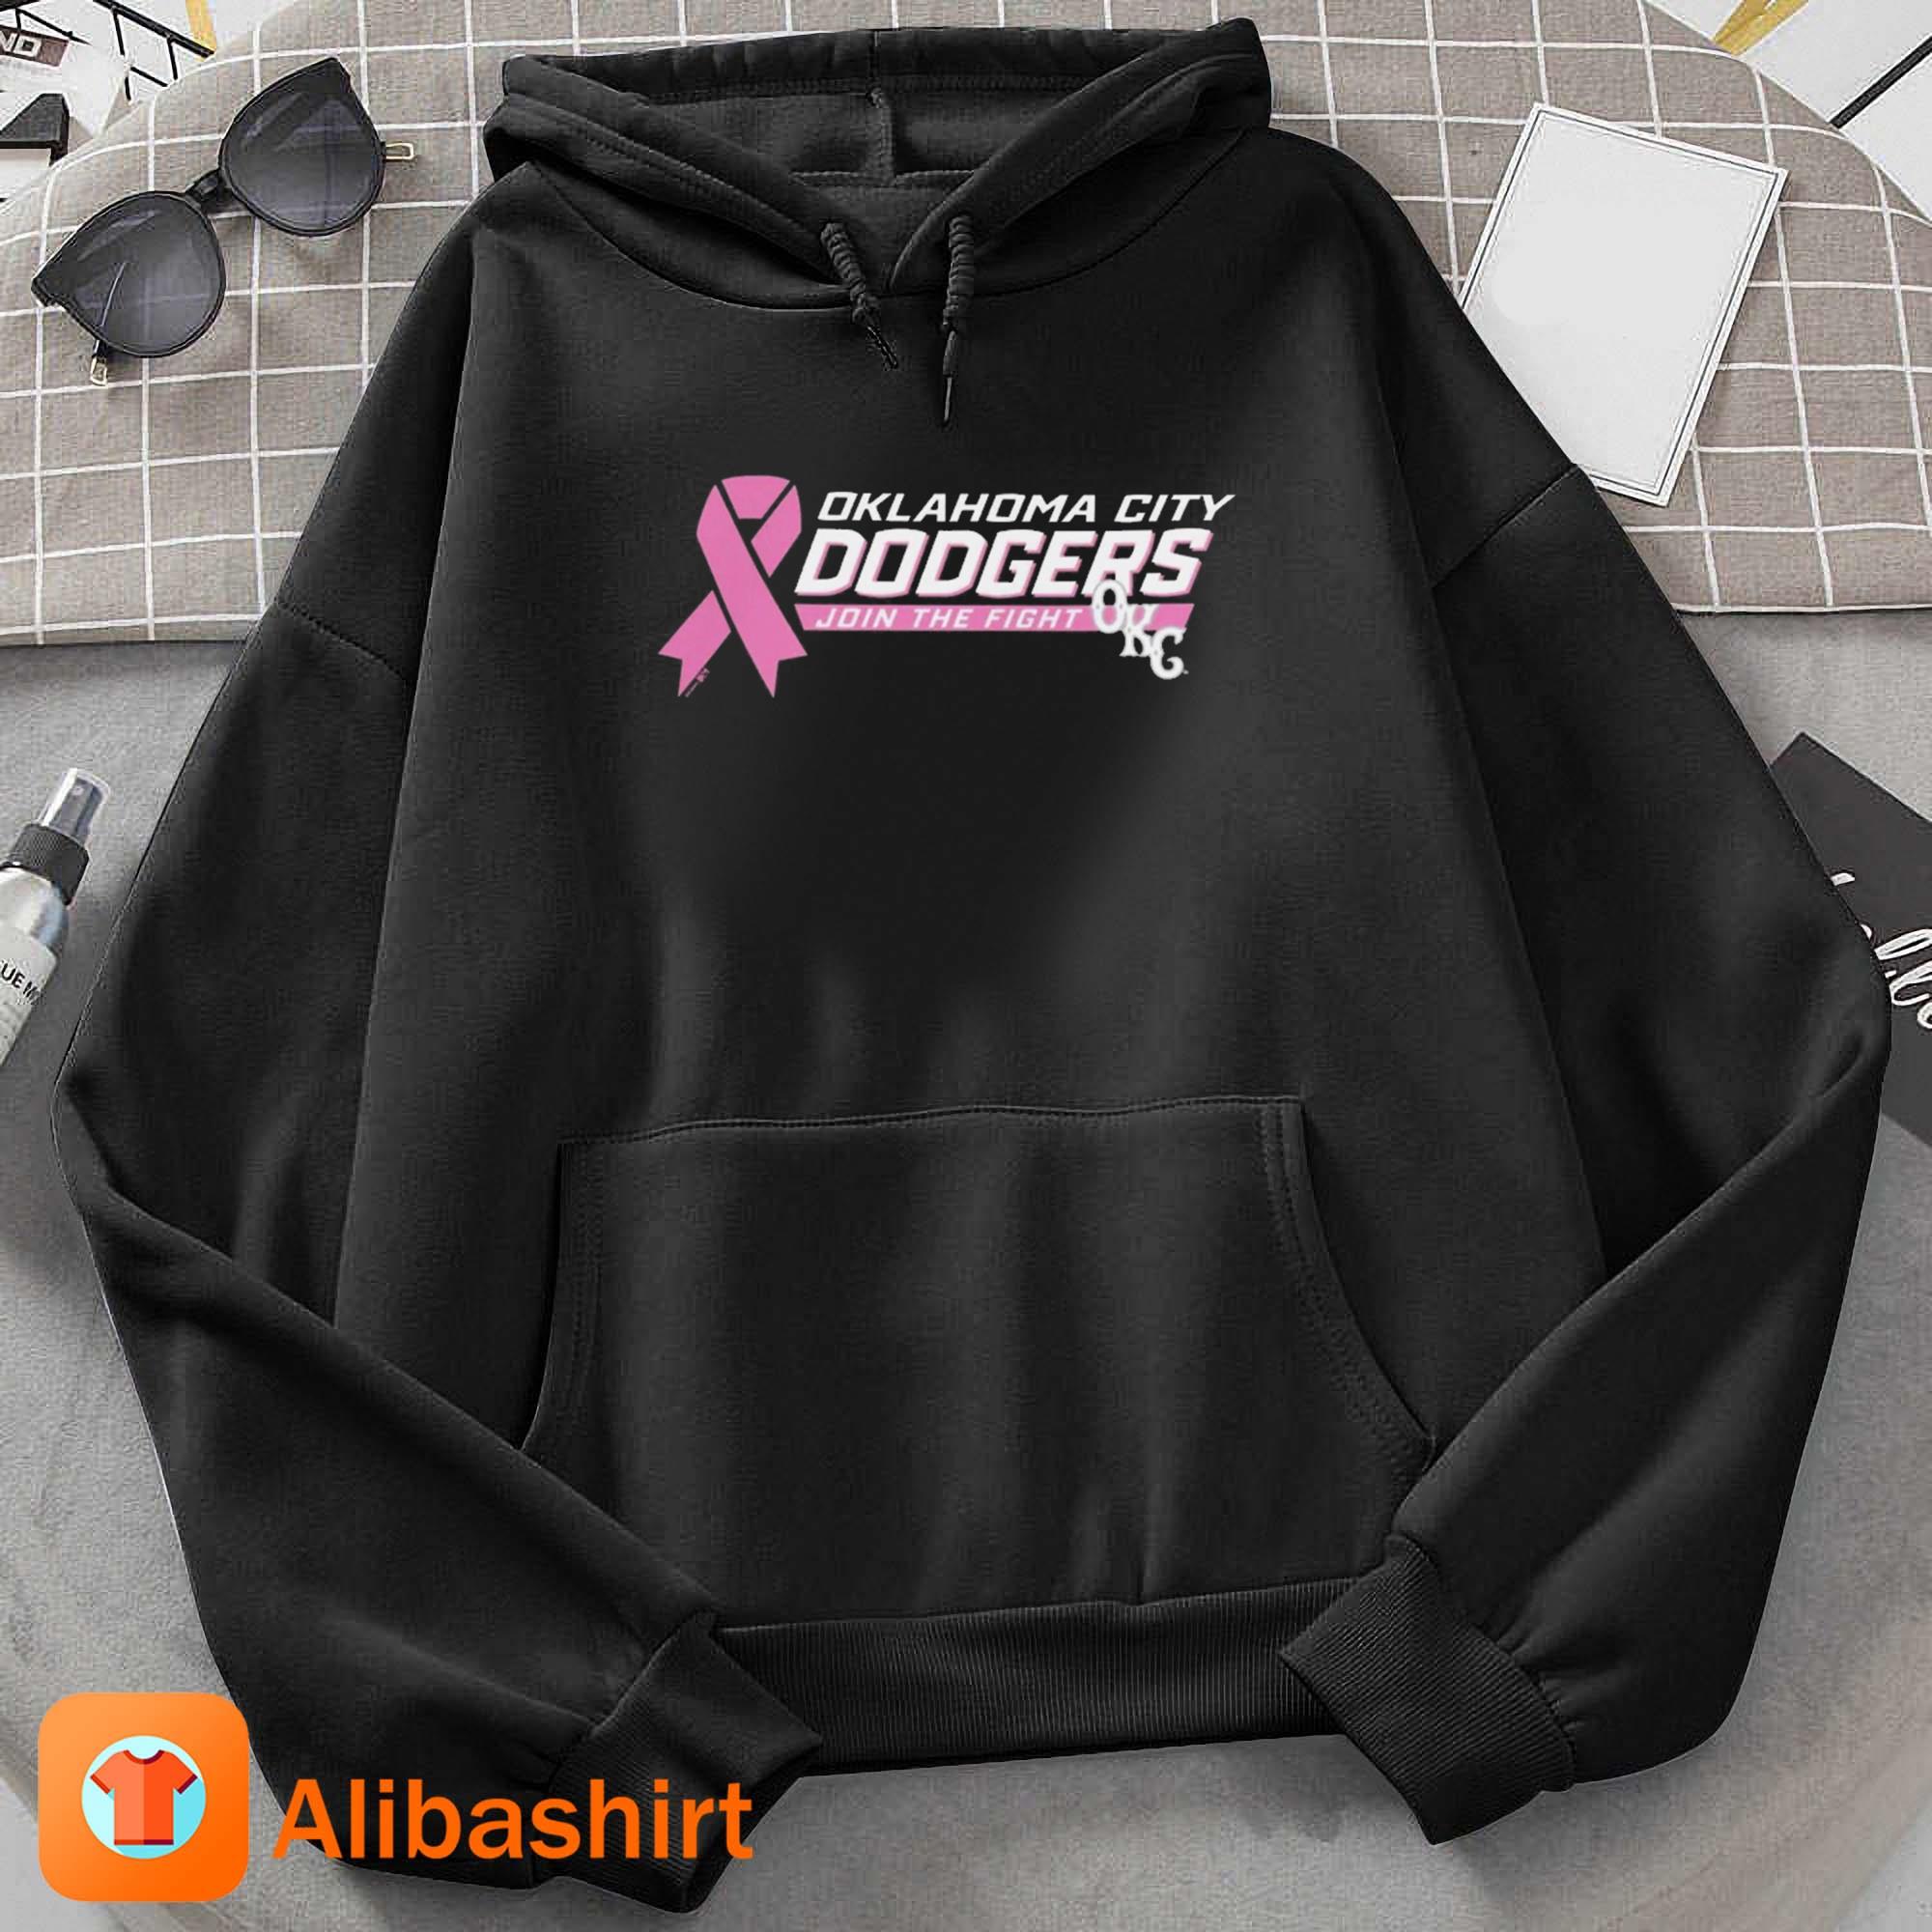 Okc Dodgers Pack The Park Pink Join The Fight Shirt Hoodie